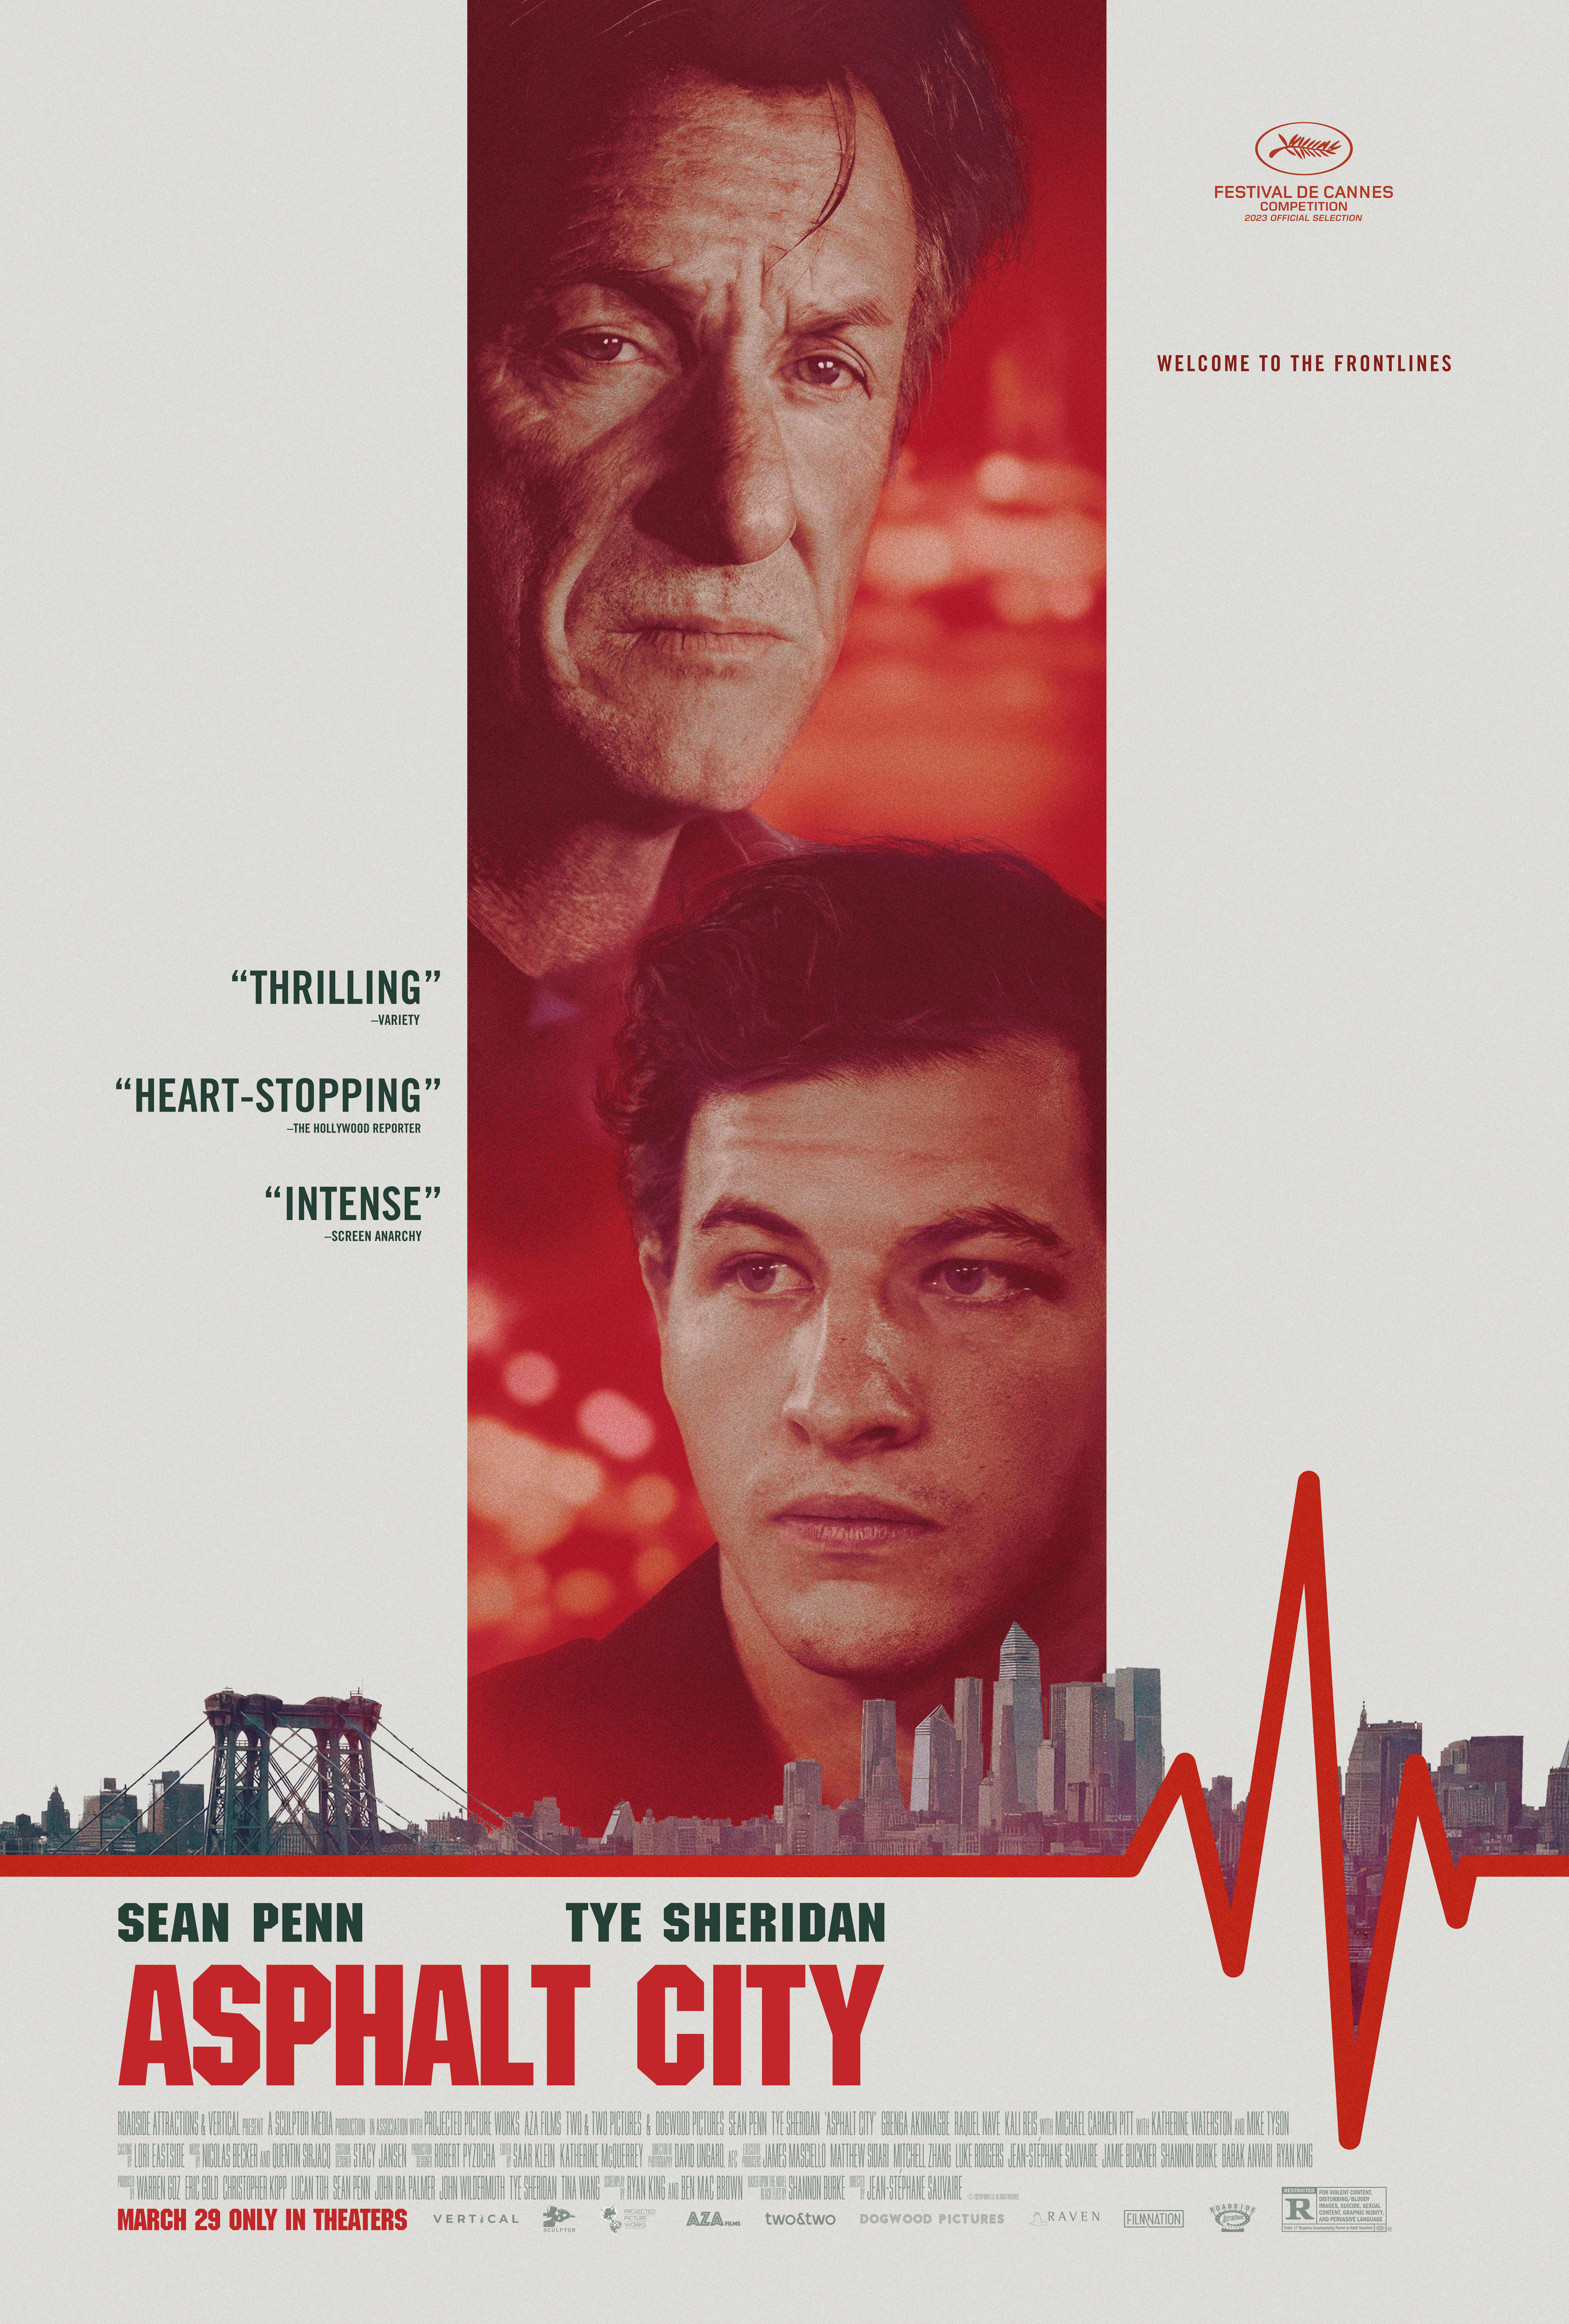 <p>We thought it was going to be "Training Day" for paramedics, but "Asphalt City" – in which Tye Sheridan stars as a rookie New York City paramedic who partners up with a jaded veteran played by <a href="https://www.wonderwall.com/celebrity/profiles/overview/sean-penn-398.article">Sean Penn</a> – couldn't come close to the 2001 crime drama. Sure, the acting was top-notch, but ultimately, "Asphalt City" was too grim and violent to win many fans. It scored a 41% rotten rating with critics on Rotten Tomatoes and made less than $500K at the box office. (The film received a limited release, only showing in a handful of theaters in New York City and Los Angeles.)</p>